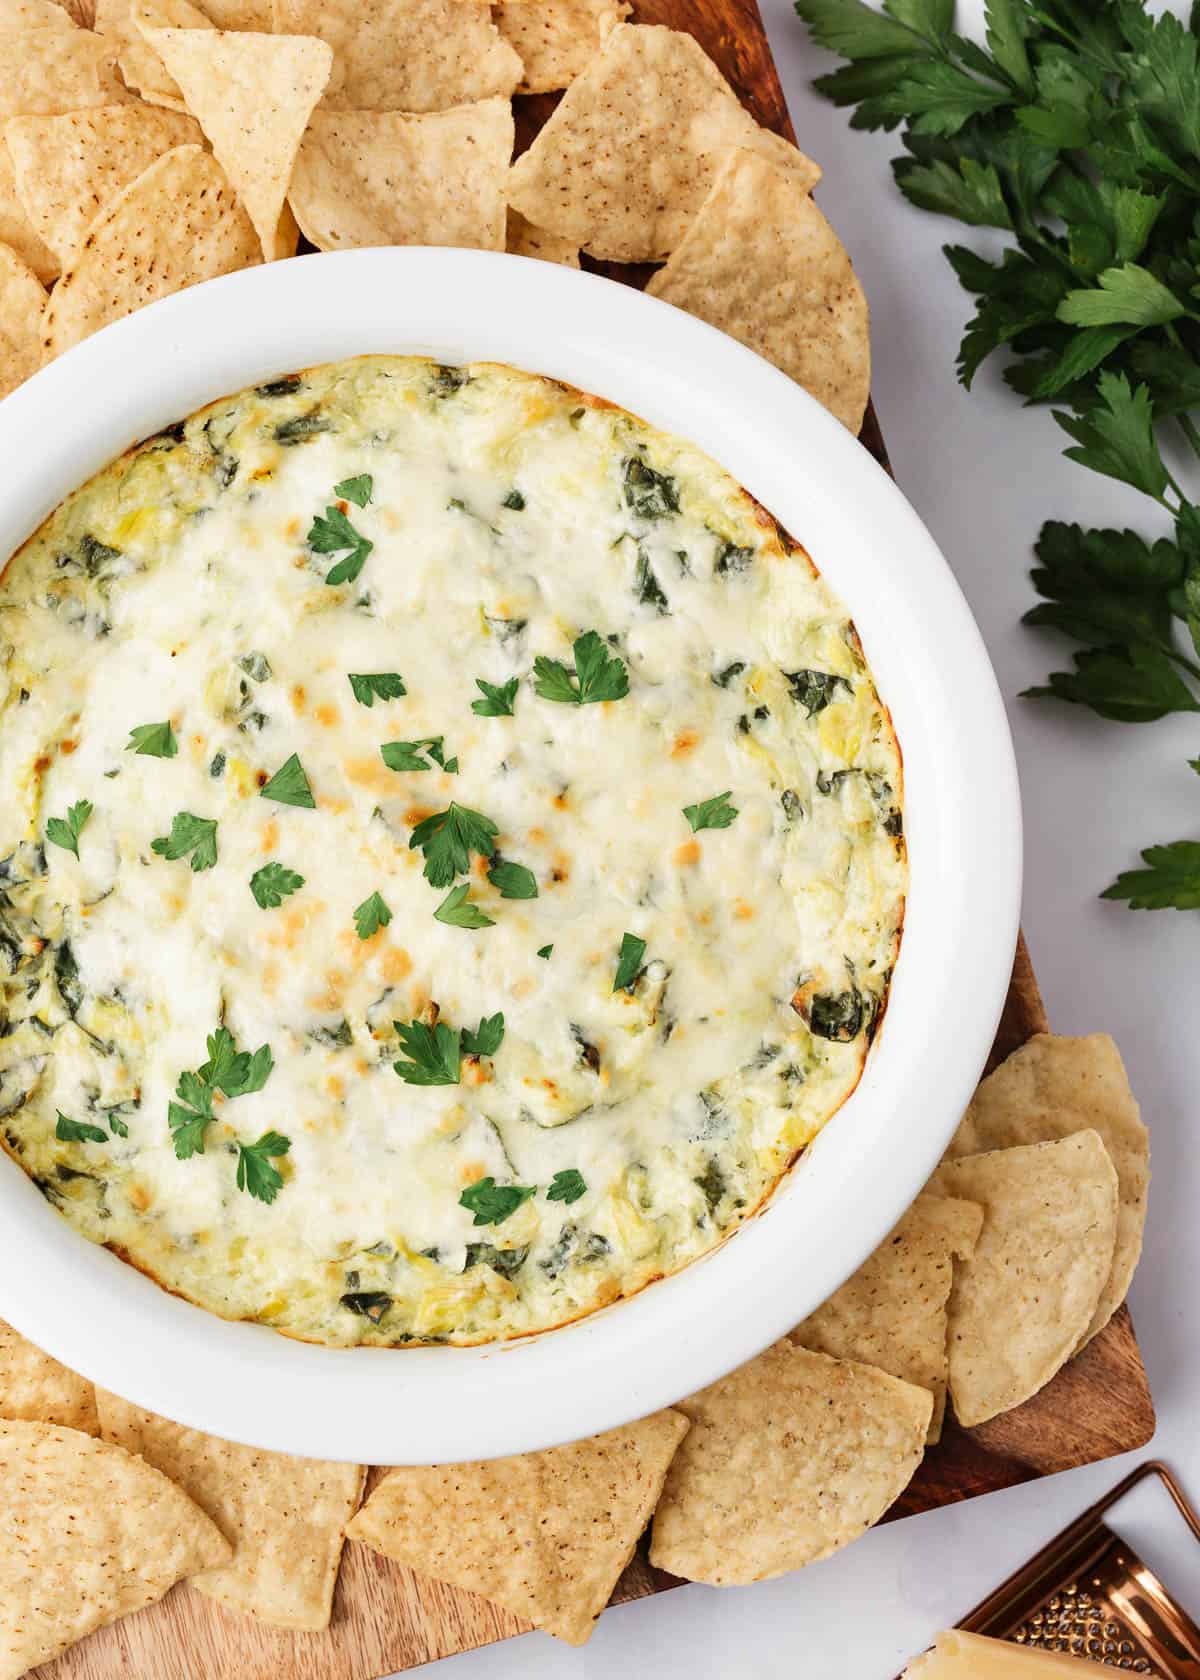 Spinach artichoke dip in a white pie dish with chips.